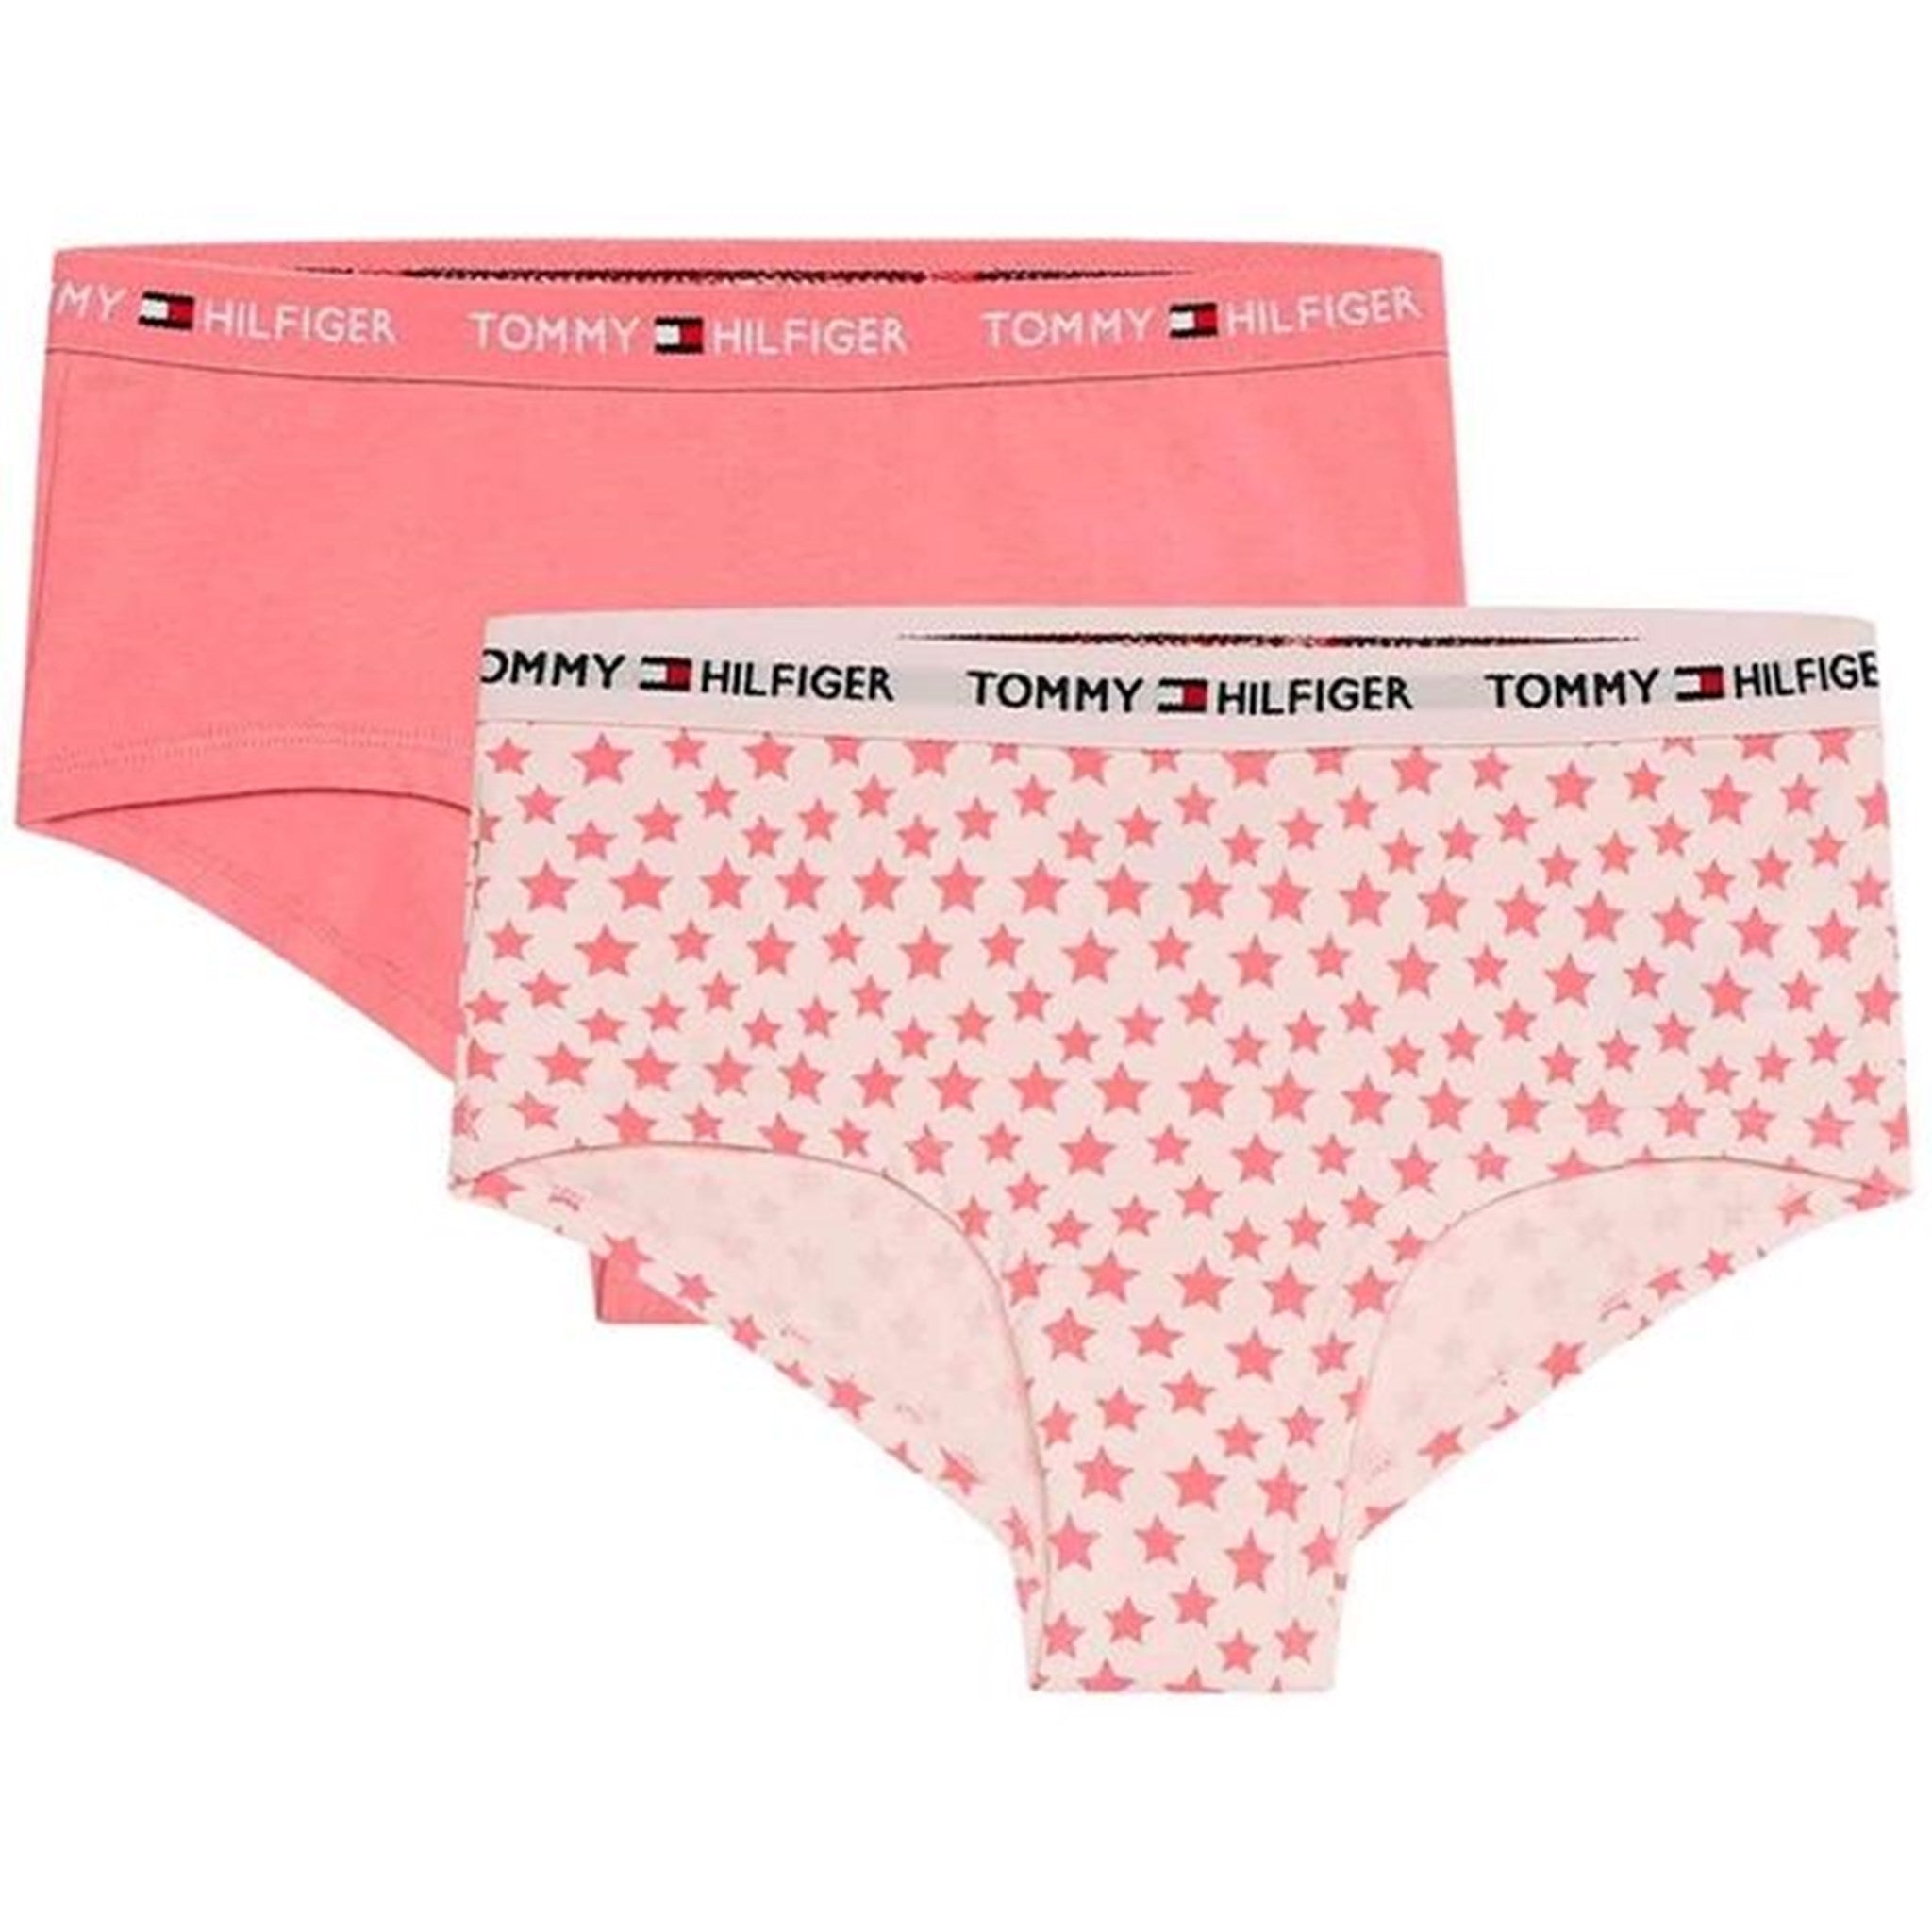 Tommy Hilfiger Shorty 2-pack Star/Hamptons Pink